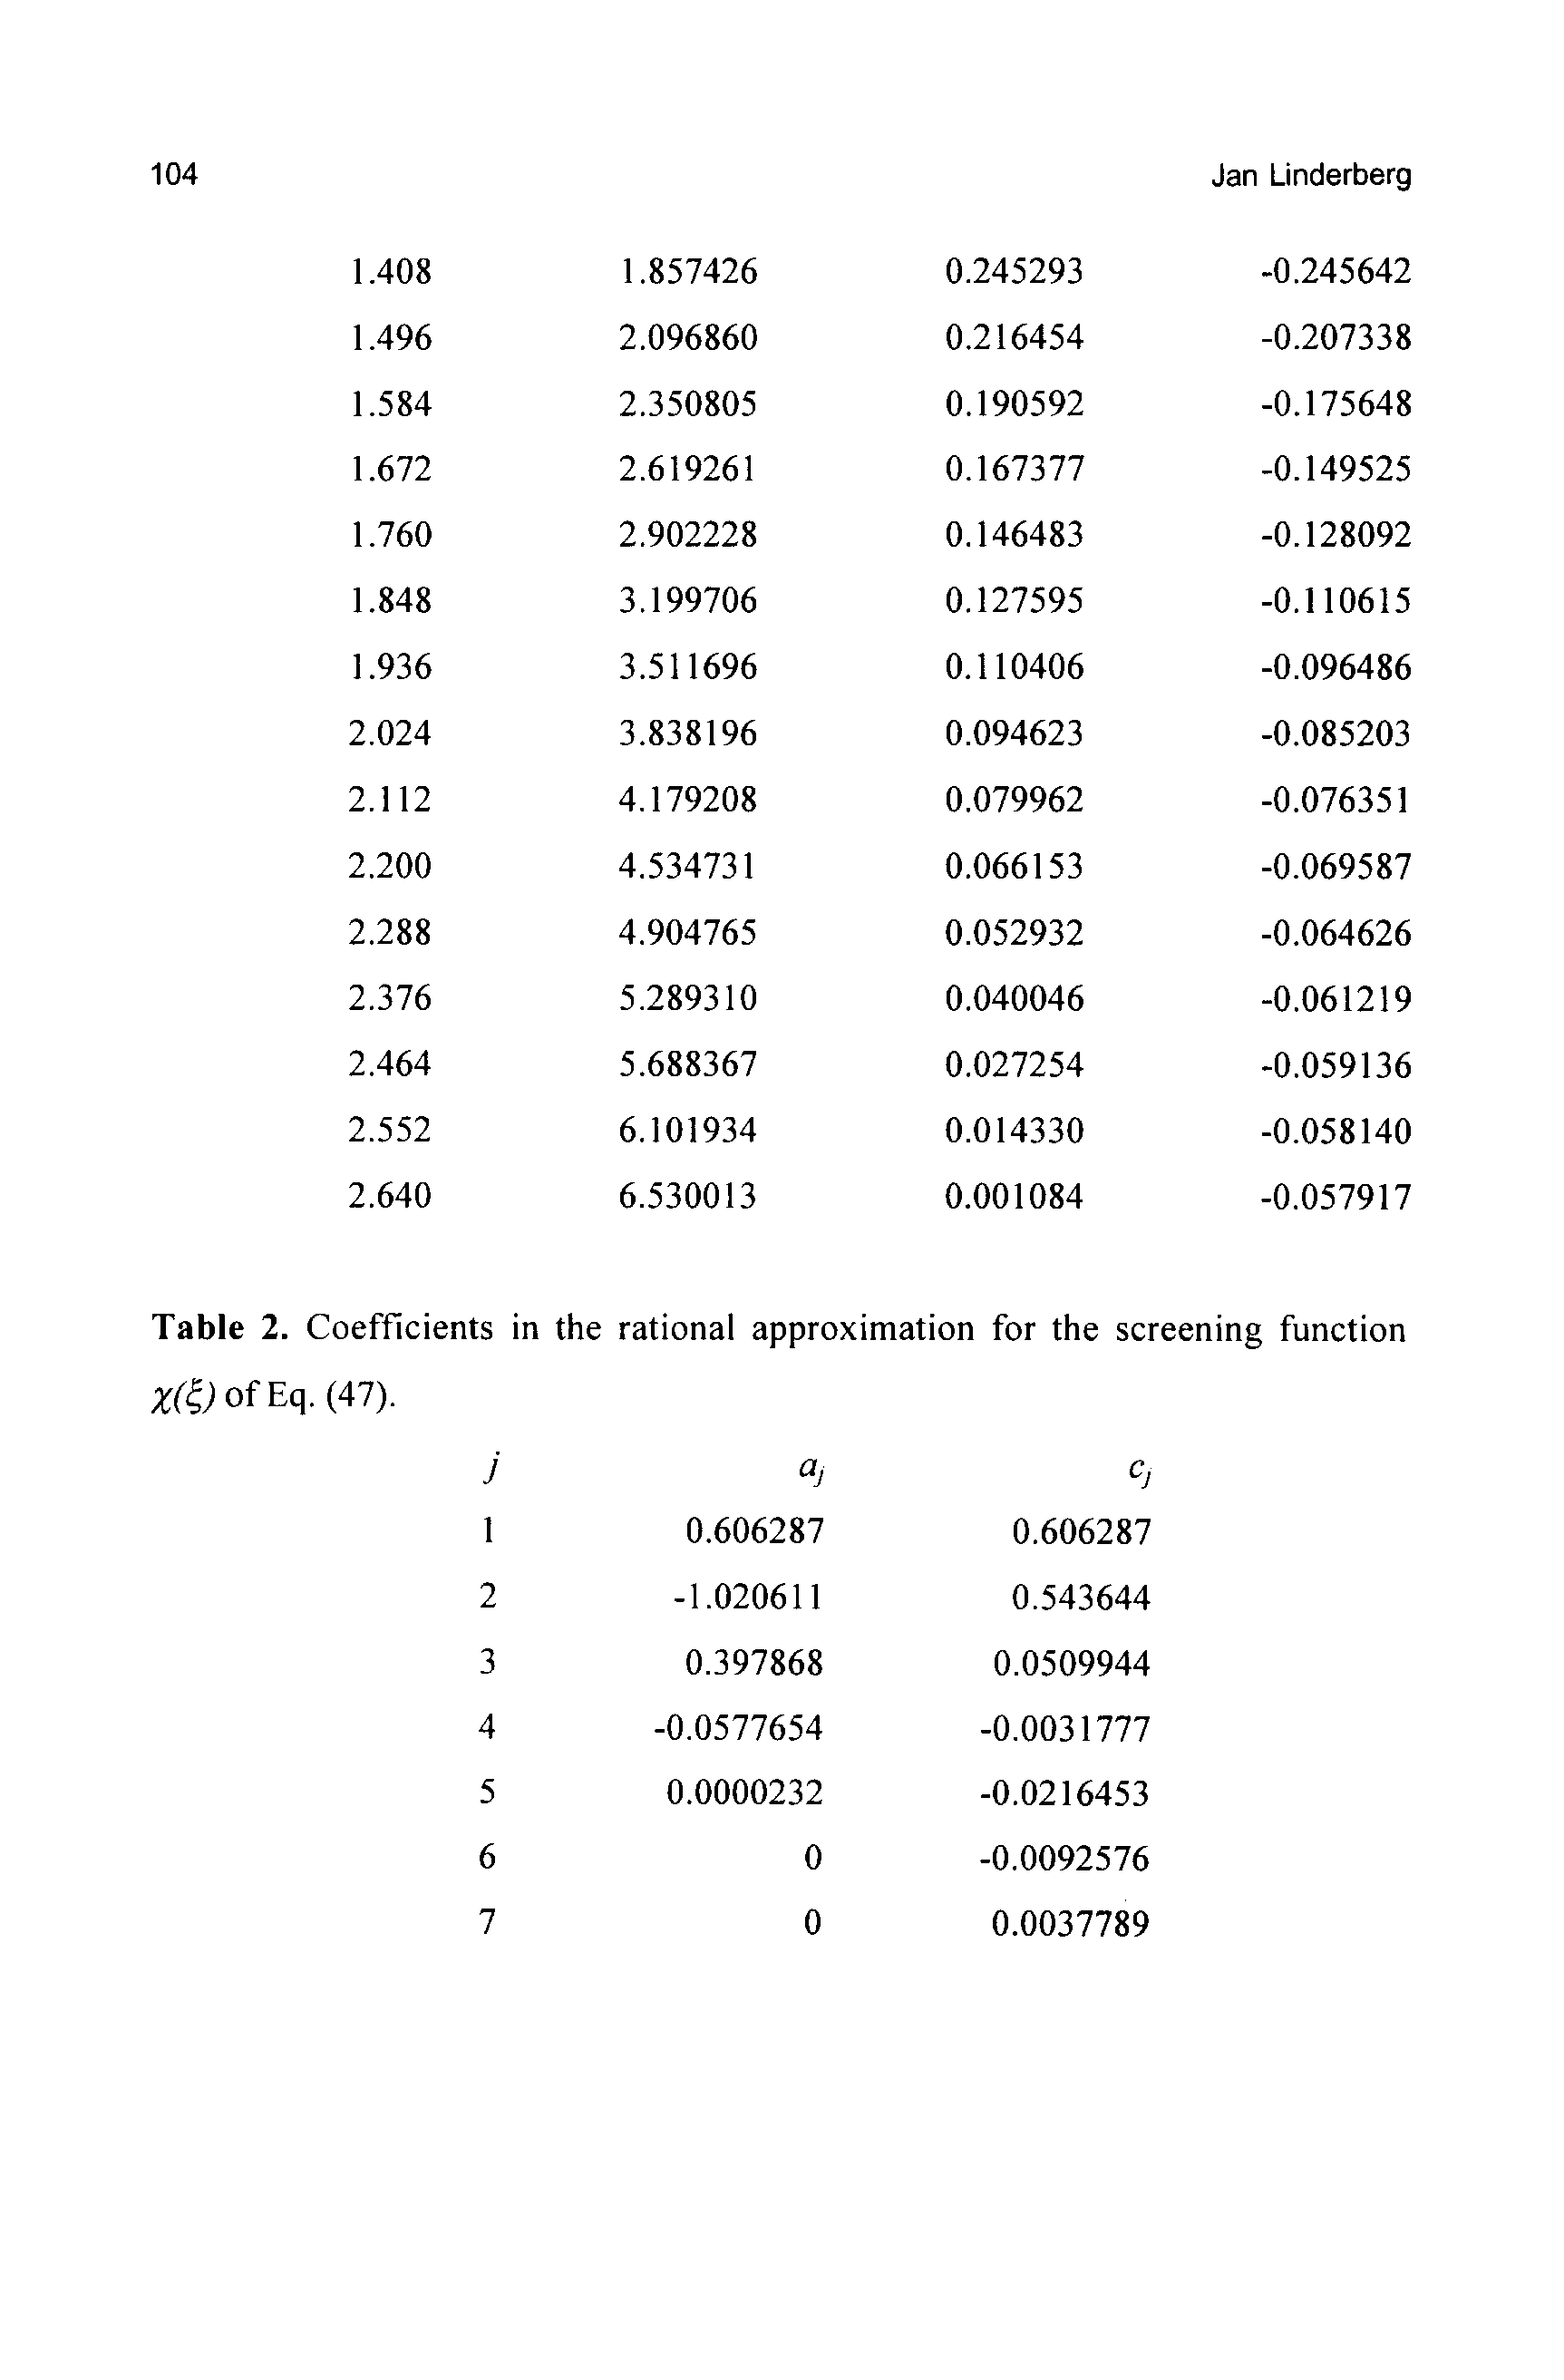 Table 2. Coefficients in the rational approximation for the screening function X(0 ofEq. (47).